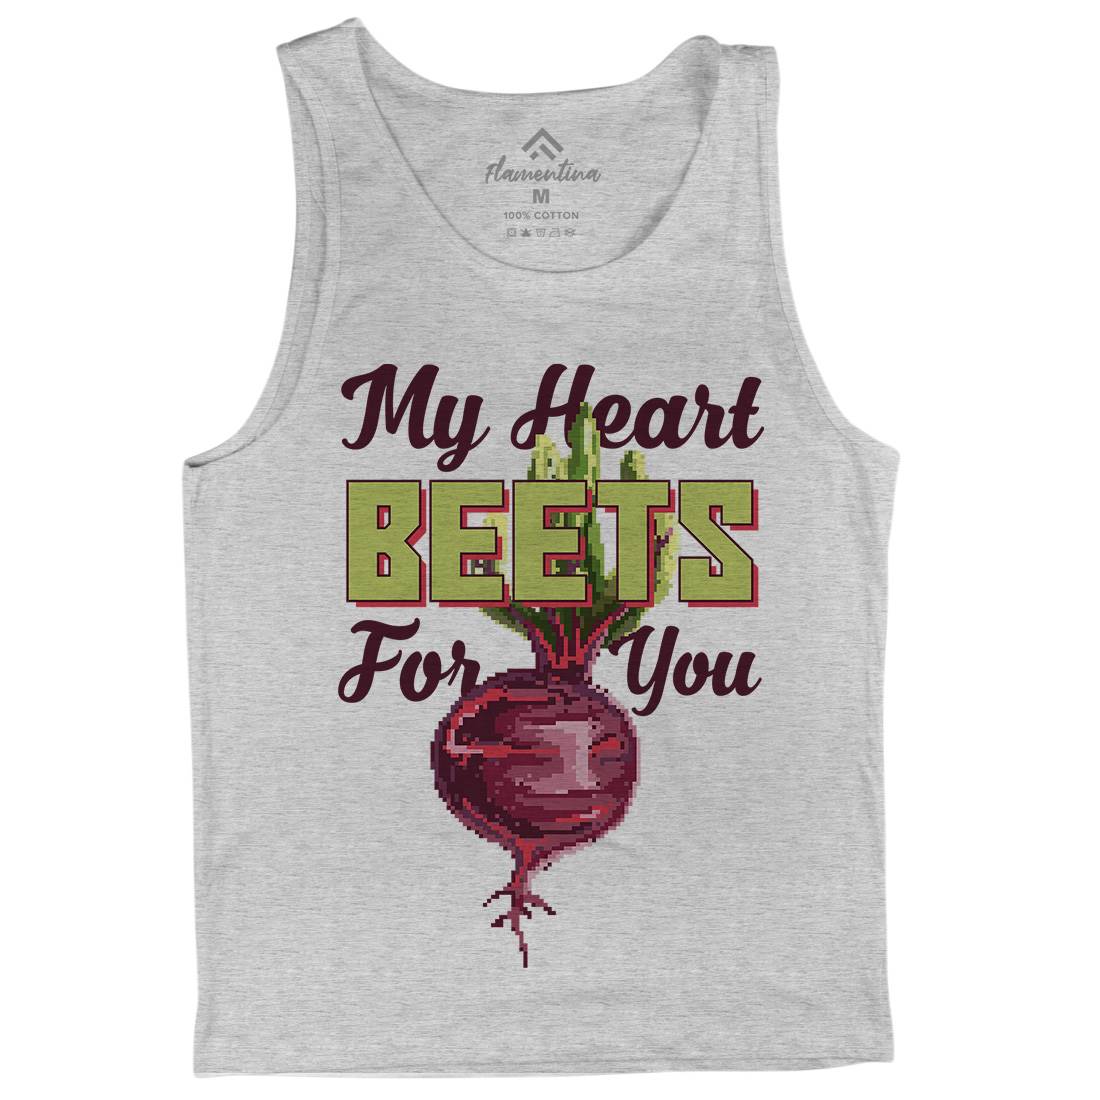 My Heart Beets For You Mens Tank Top Vest Food B937